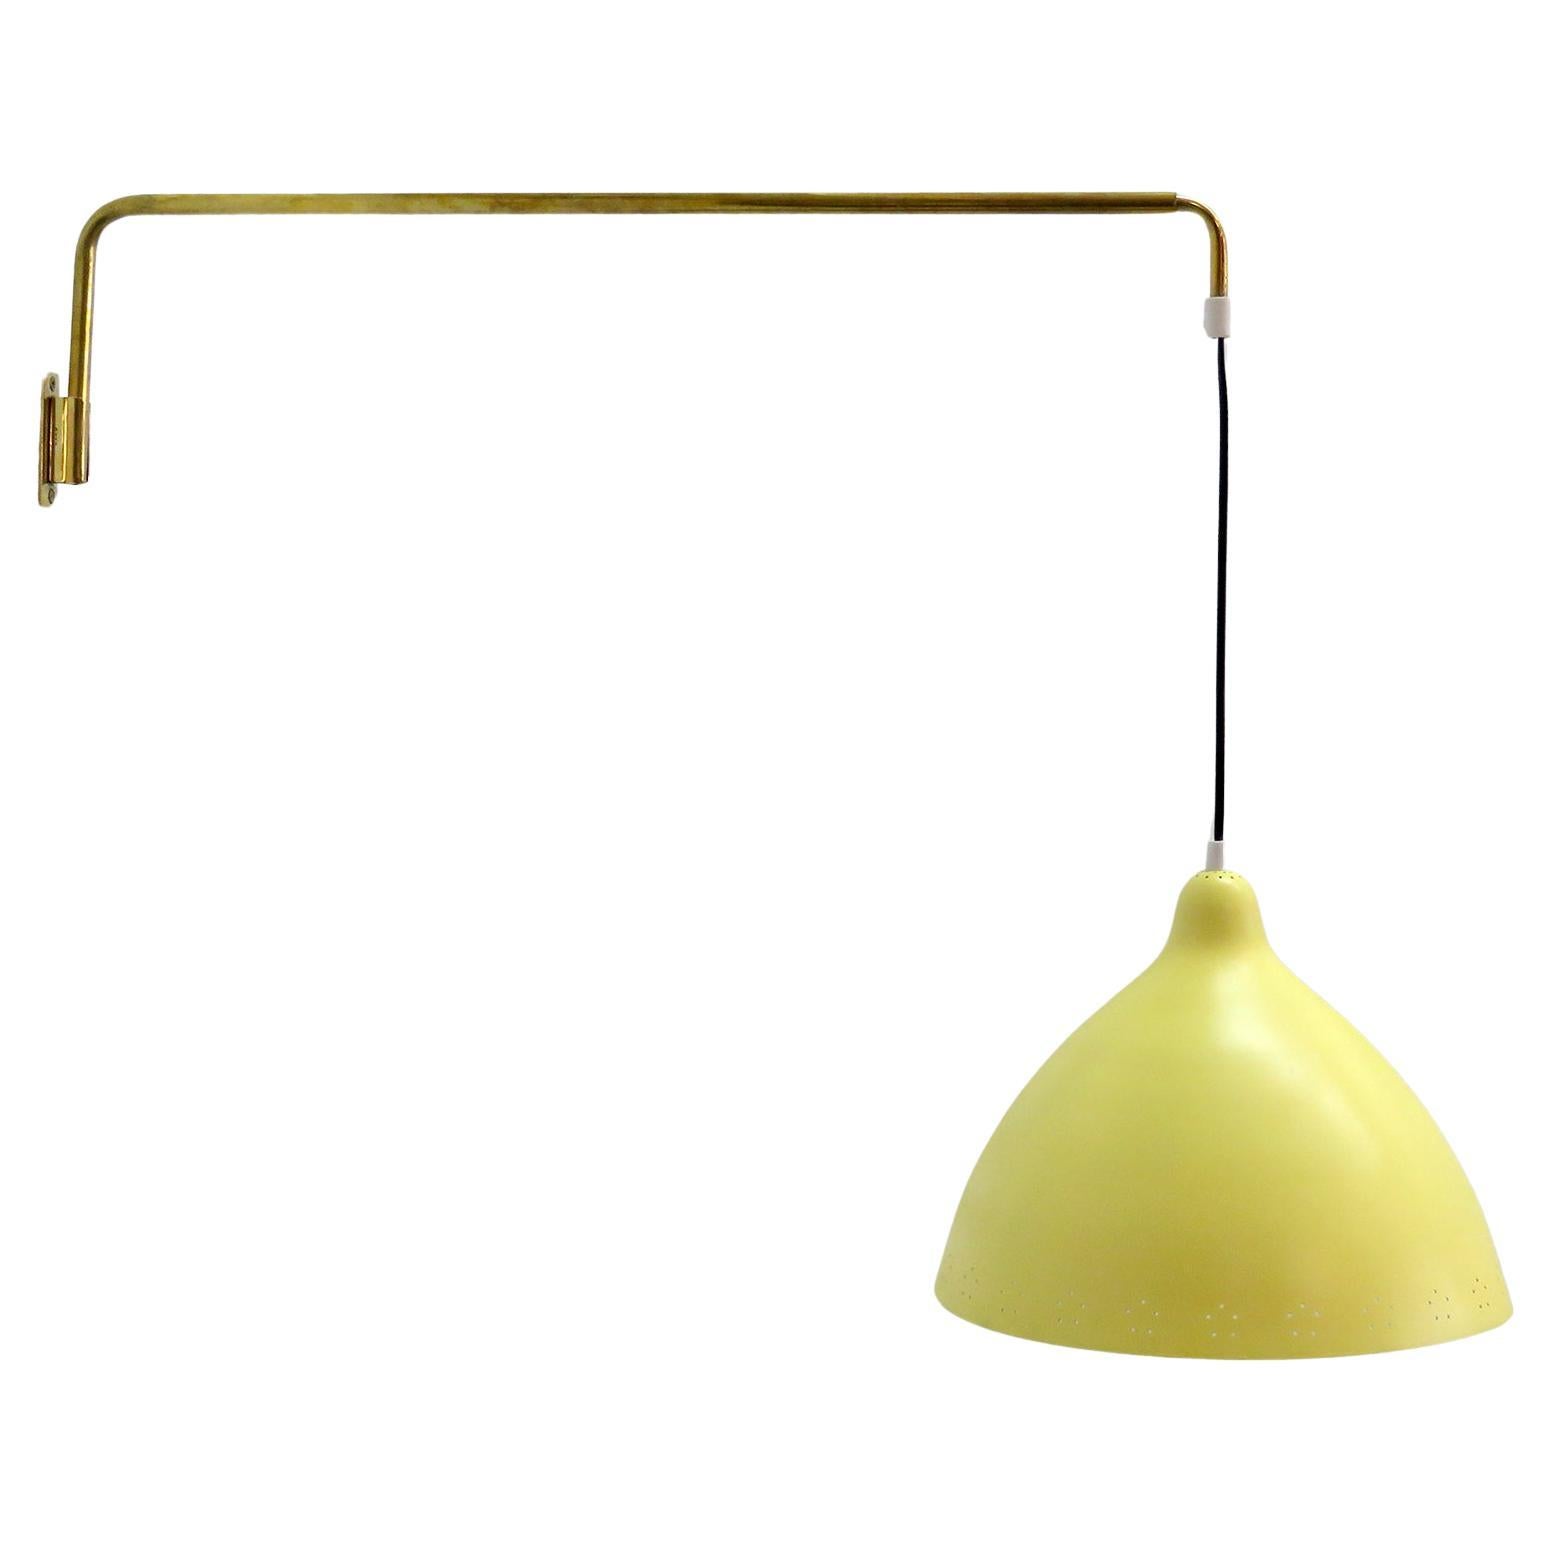 Swing Arm Wall Lights by Lisa Johansson-Pape for Orno, 1960 For Sale